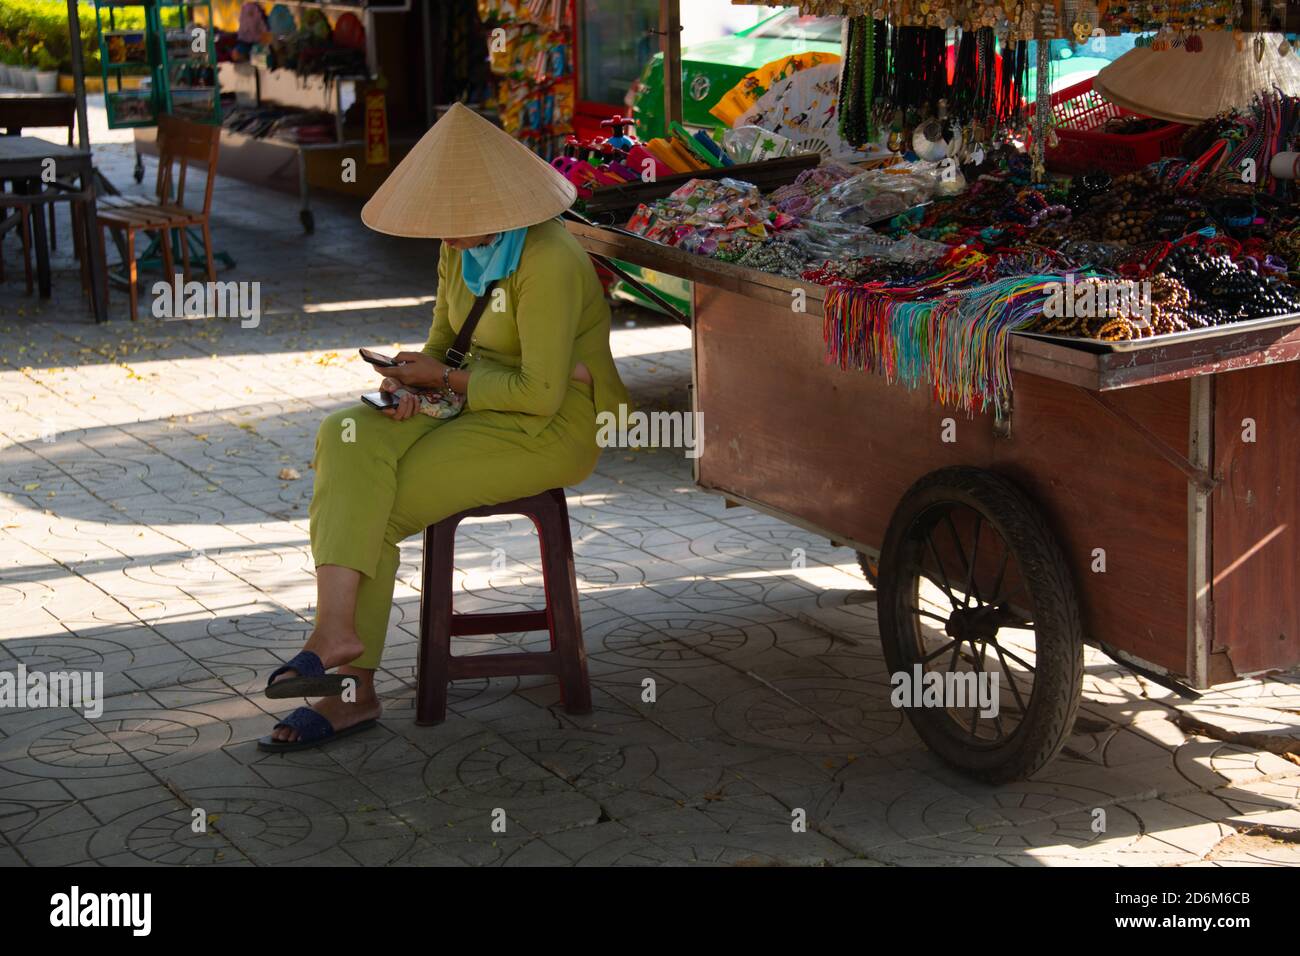 Visiting the street of the City in Hanoi and Halong Bay in Vietnam with streetfood and local markets Stock Photo